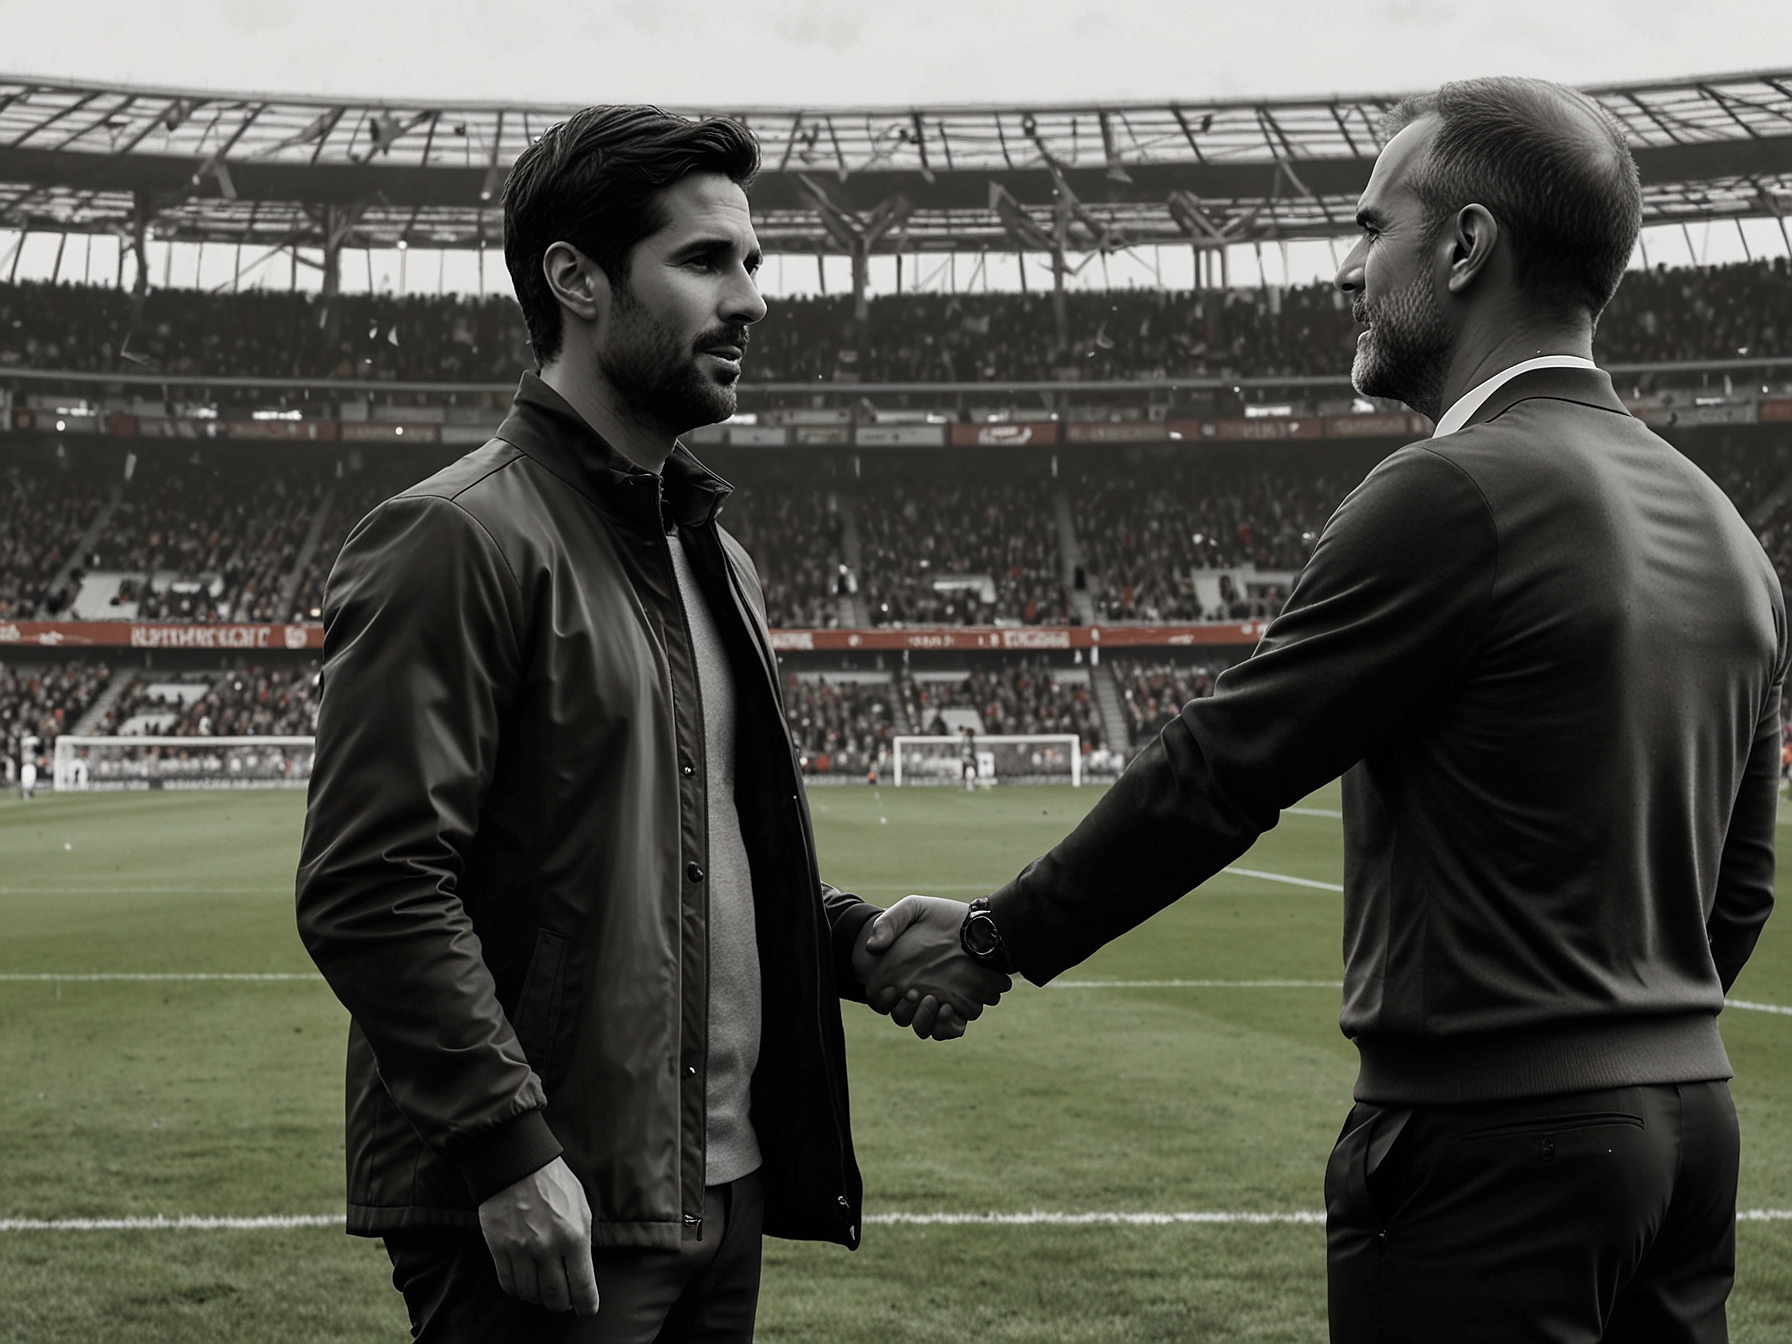 A depiction of Mikel Arteta, Jurgen Klopp, and Pep Guardiola strategizing with a background of a football pitch, highlighting the intense competition between Arsenal, Liverpool, and Manchester City for the player's signature.